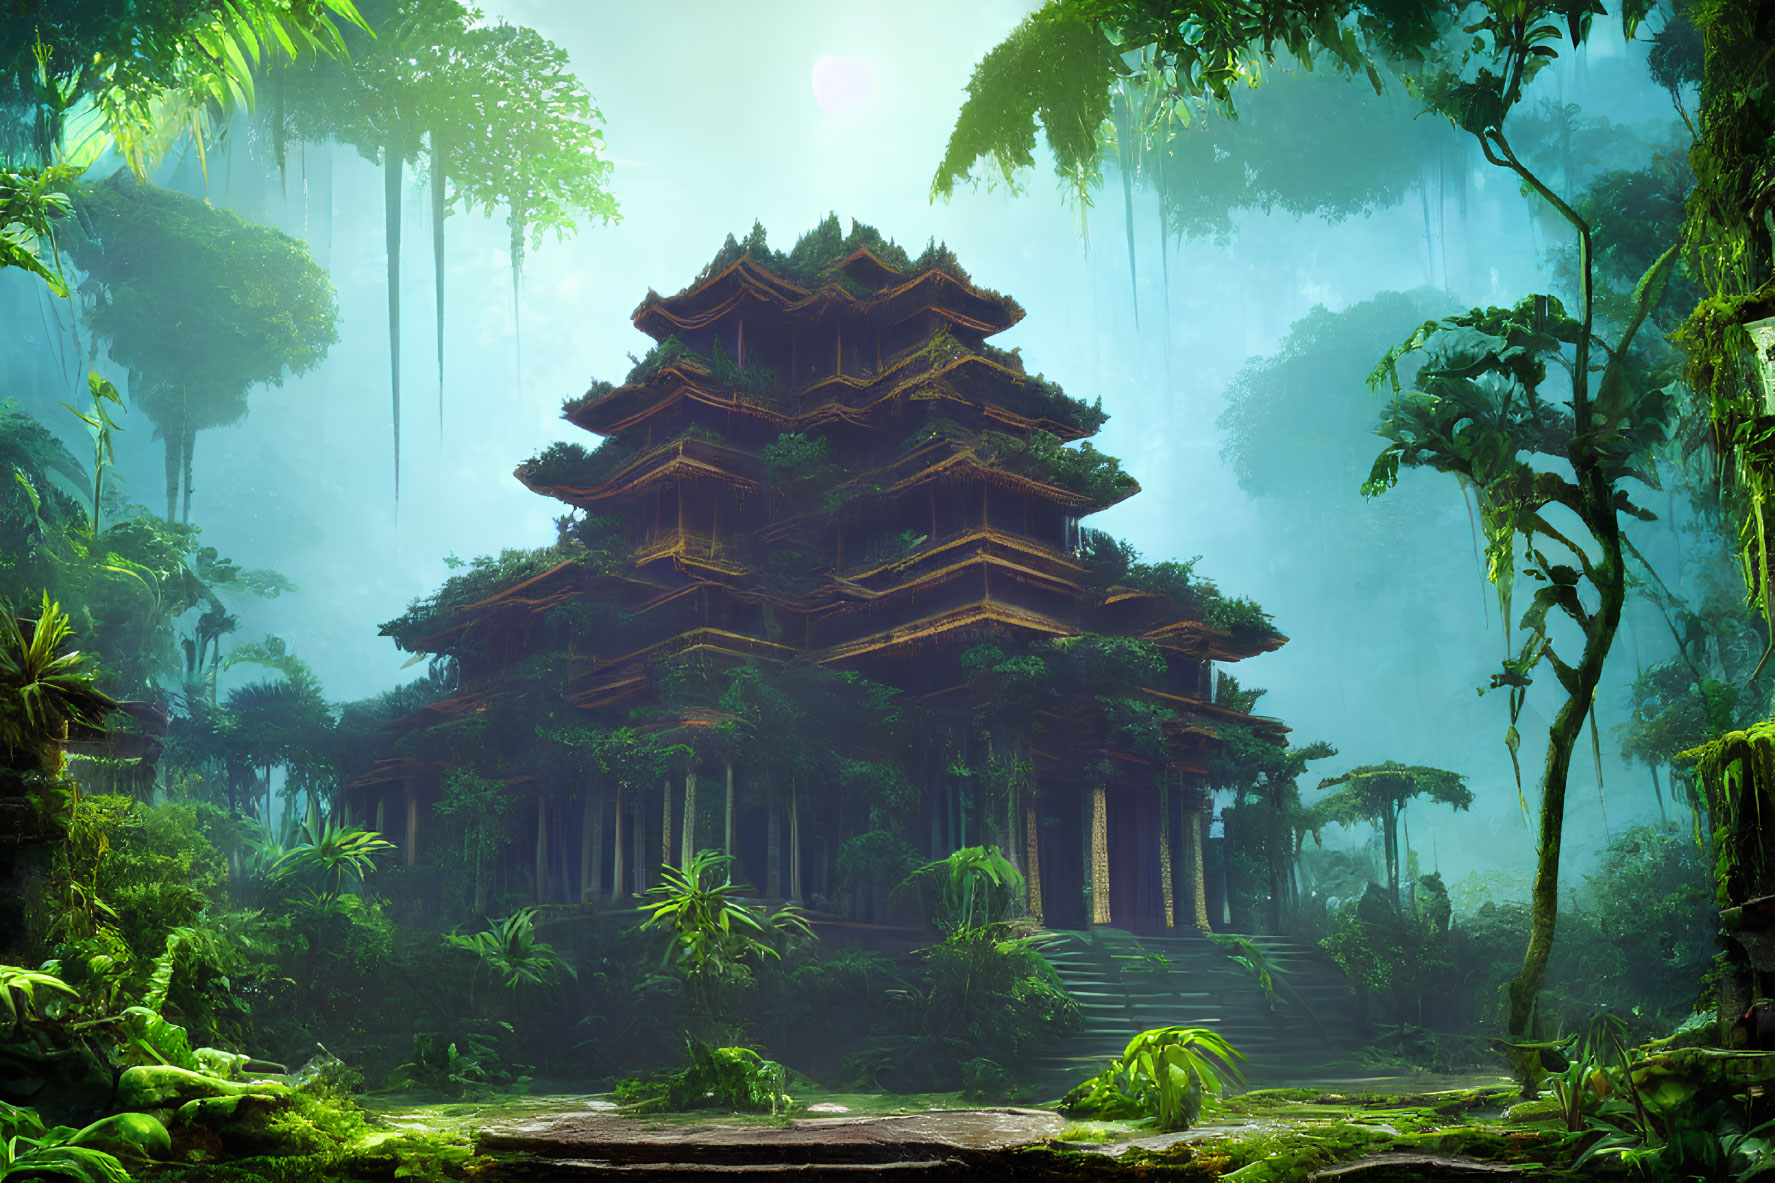 Mystical multi-tiered temple in lush foggy rainforest